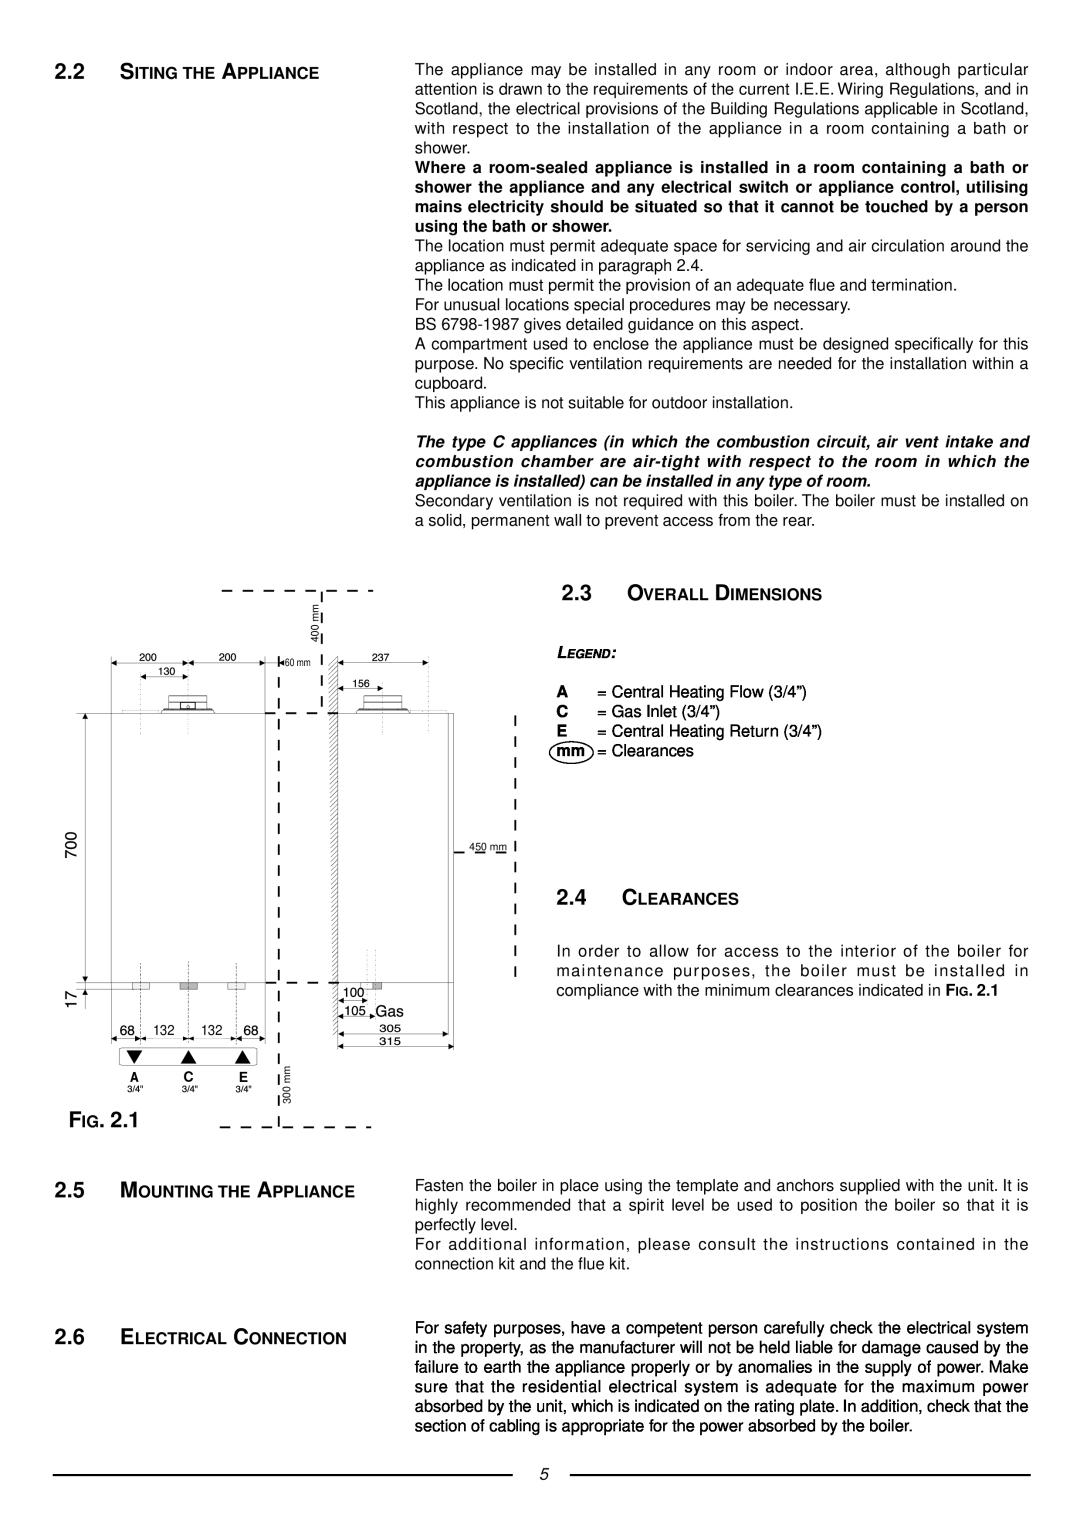 Ariston 41-116-05 installation instructions F Ig, Siting The Appliance, Overall Dimensions, Clearances 